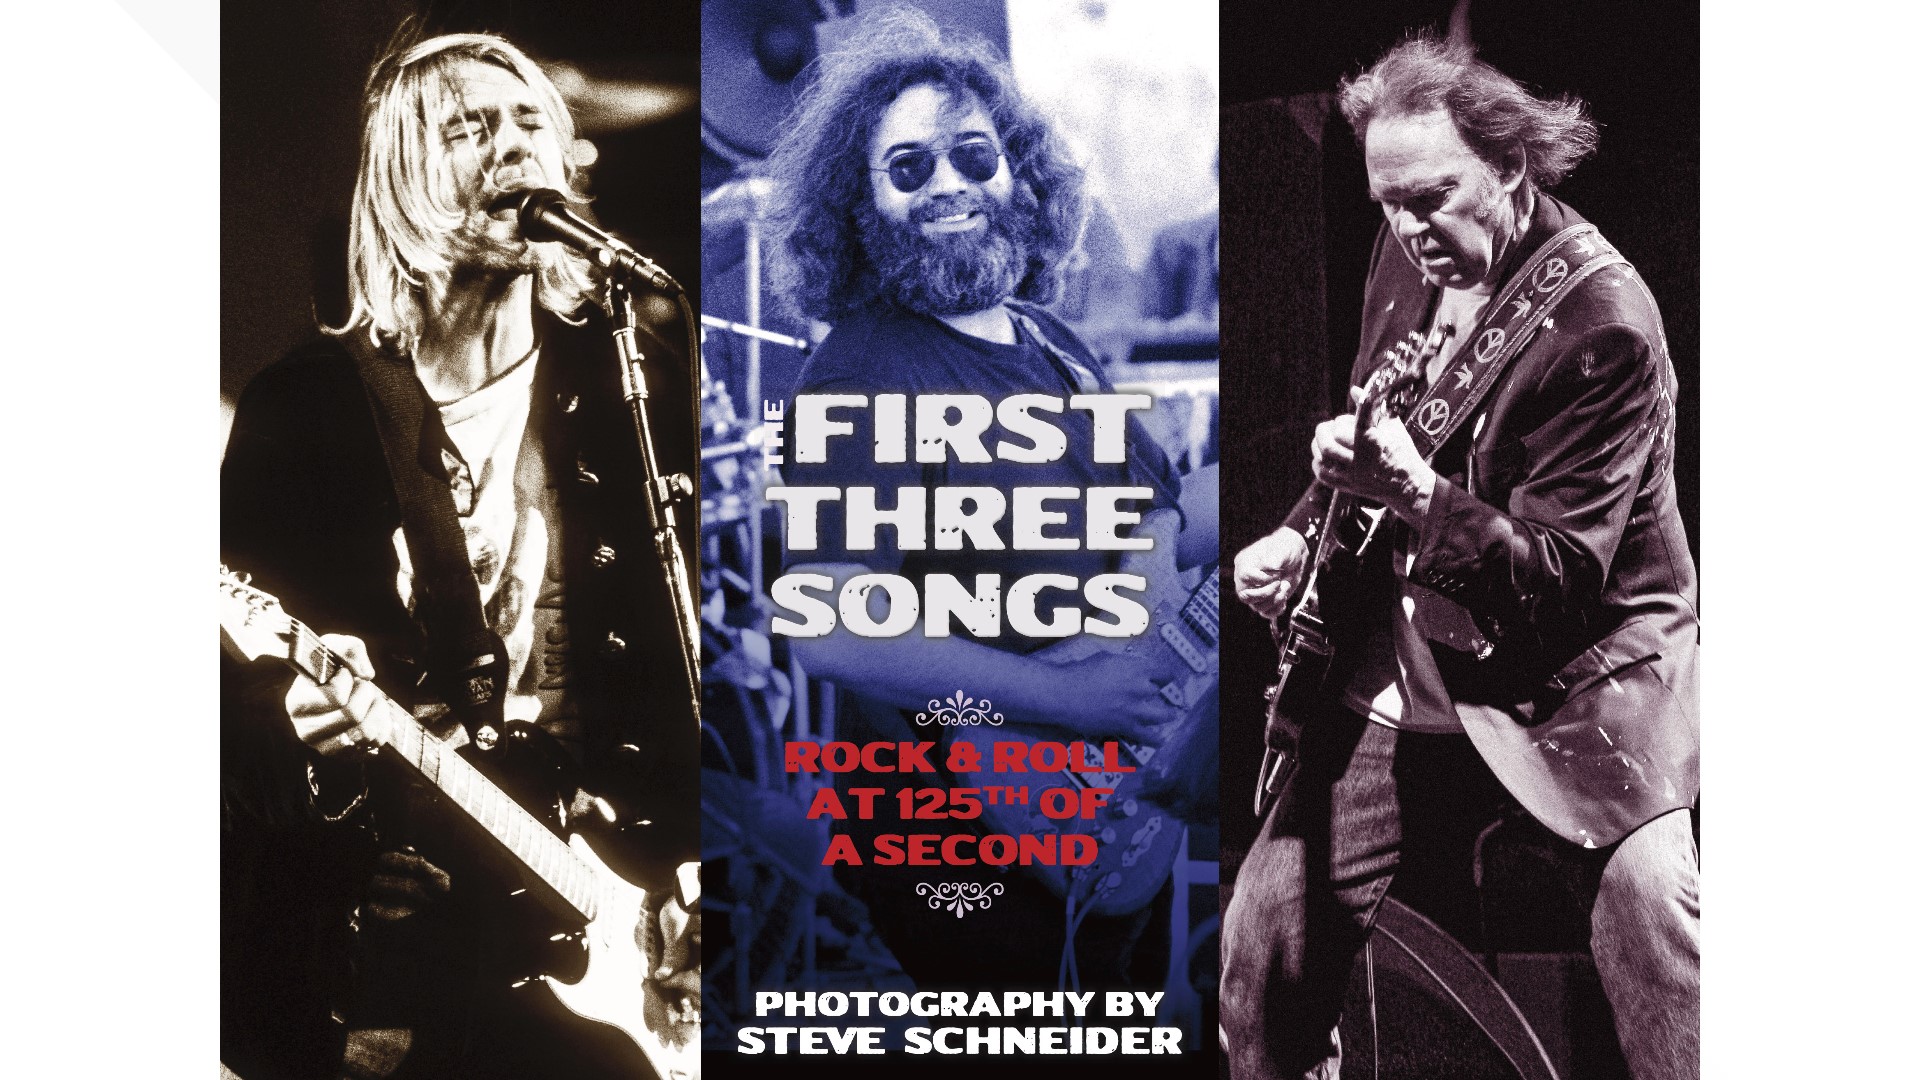 Shoreline concert photographer Steve Schneider's new book has more than 350 images of rock-and-roll icons. #k5evening